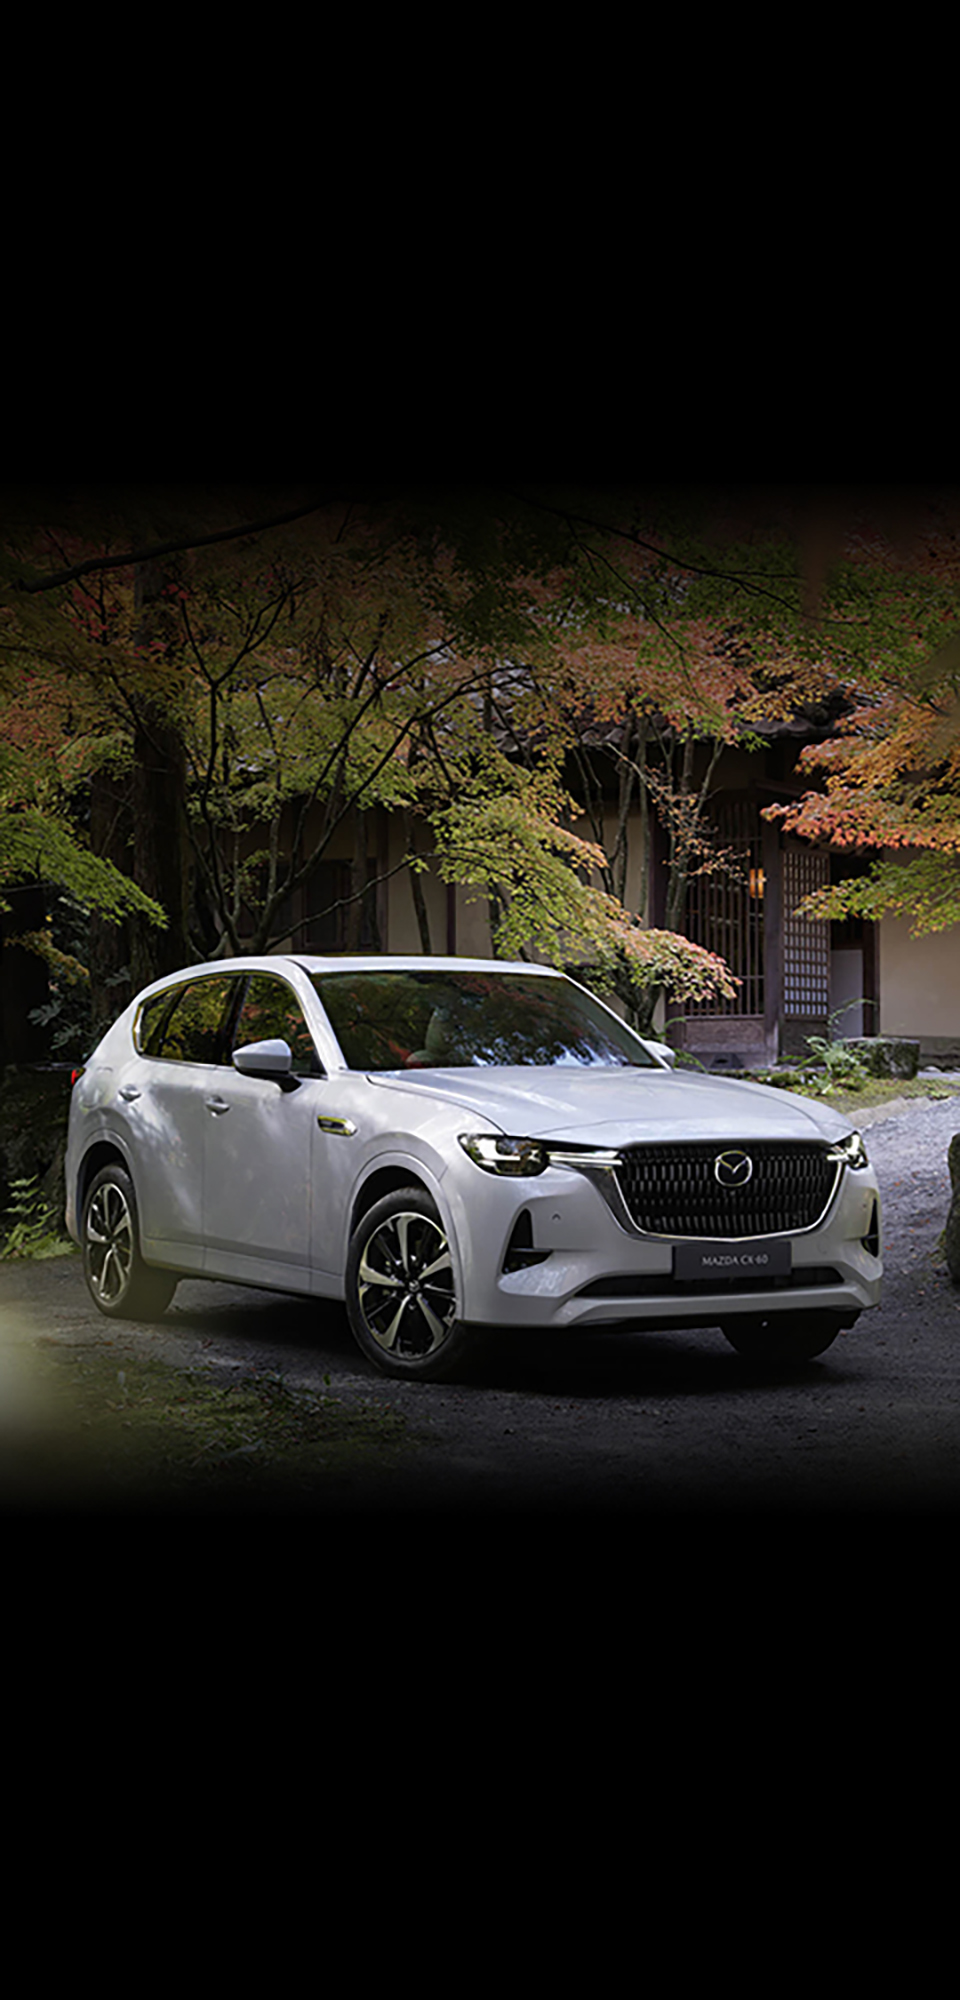 The all-new Mazda CX-60 Plug-In Hybrid SUV shown from the front parked outside next to trees.